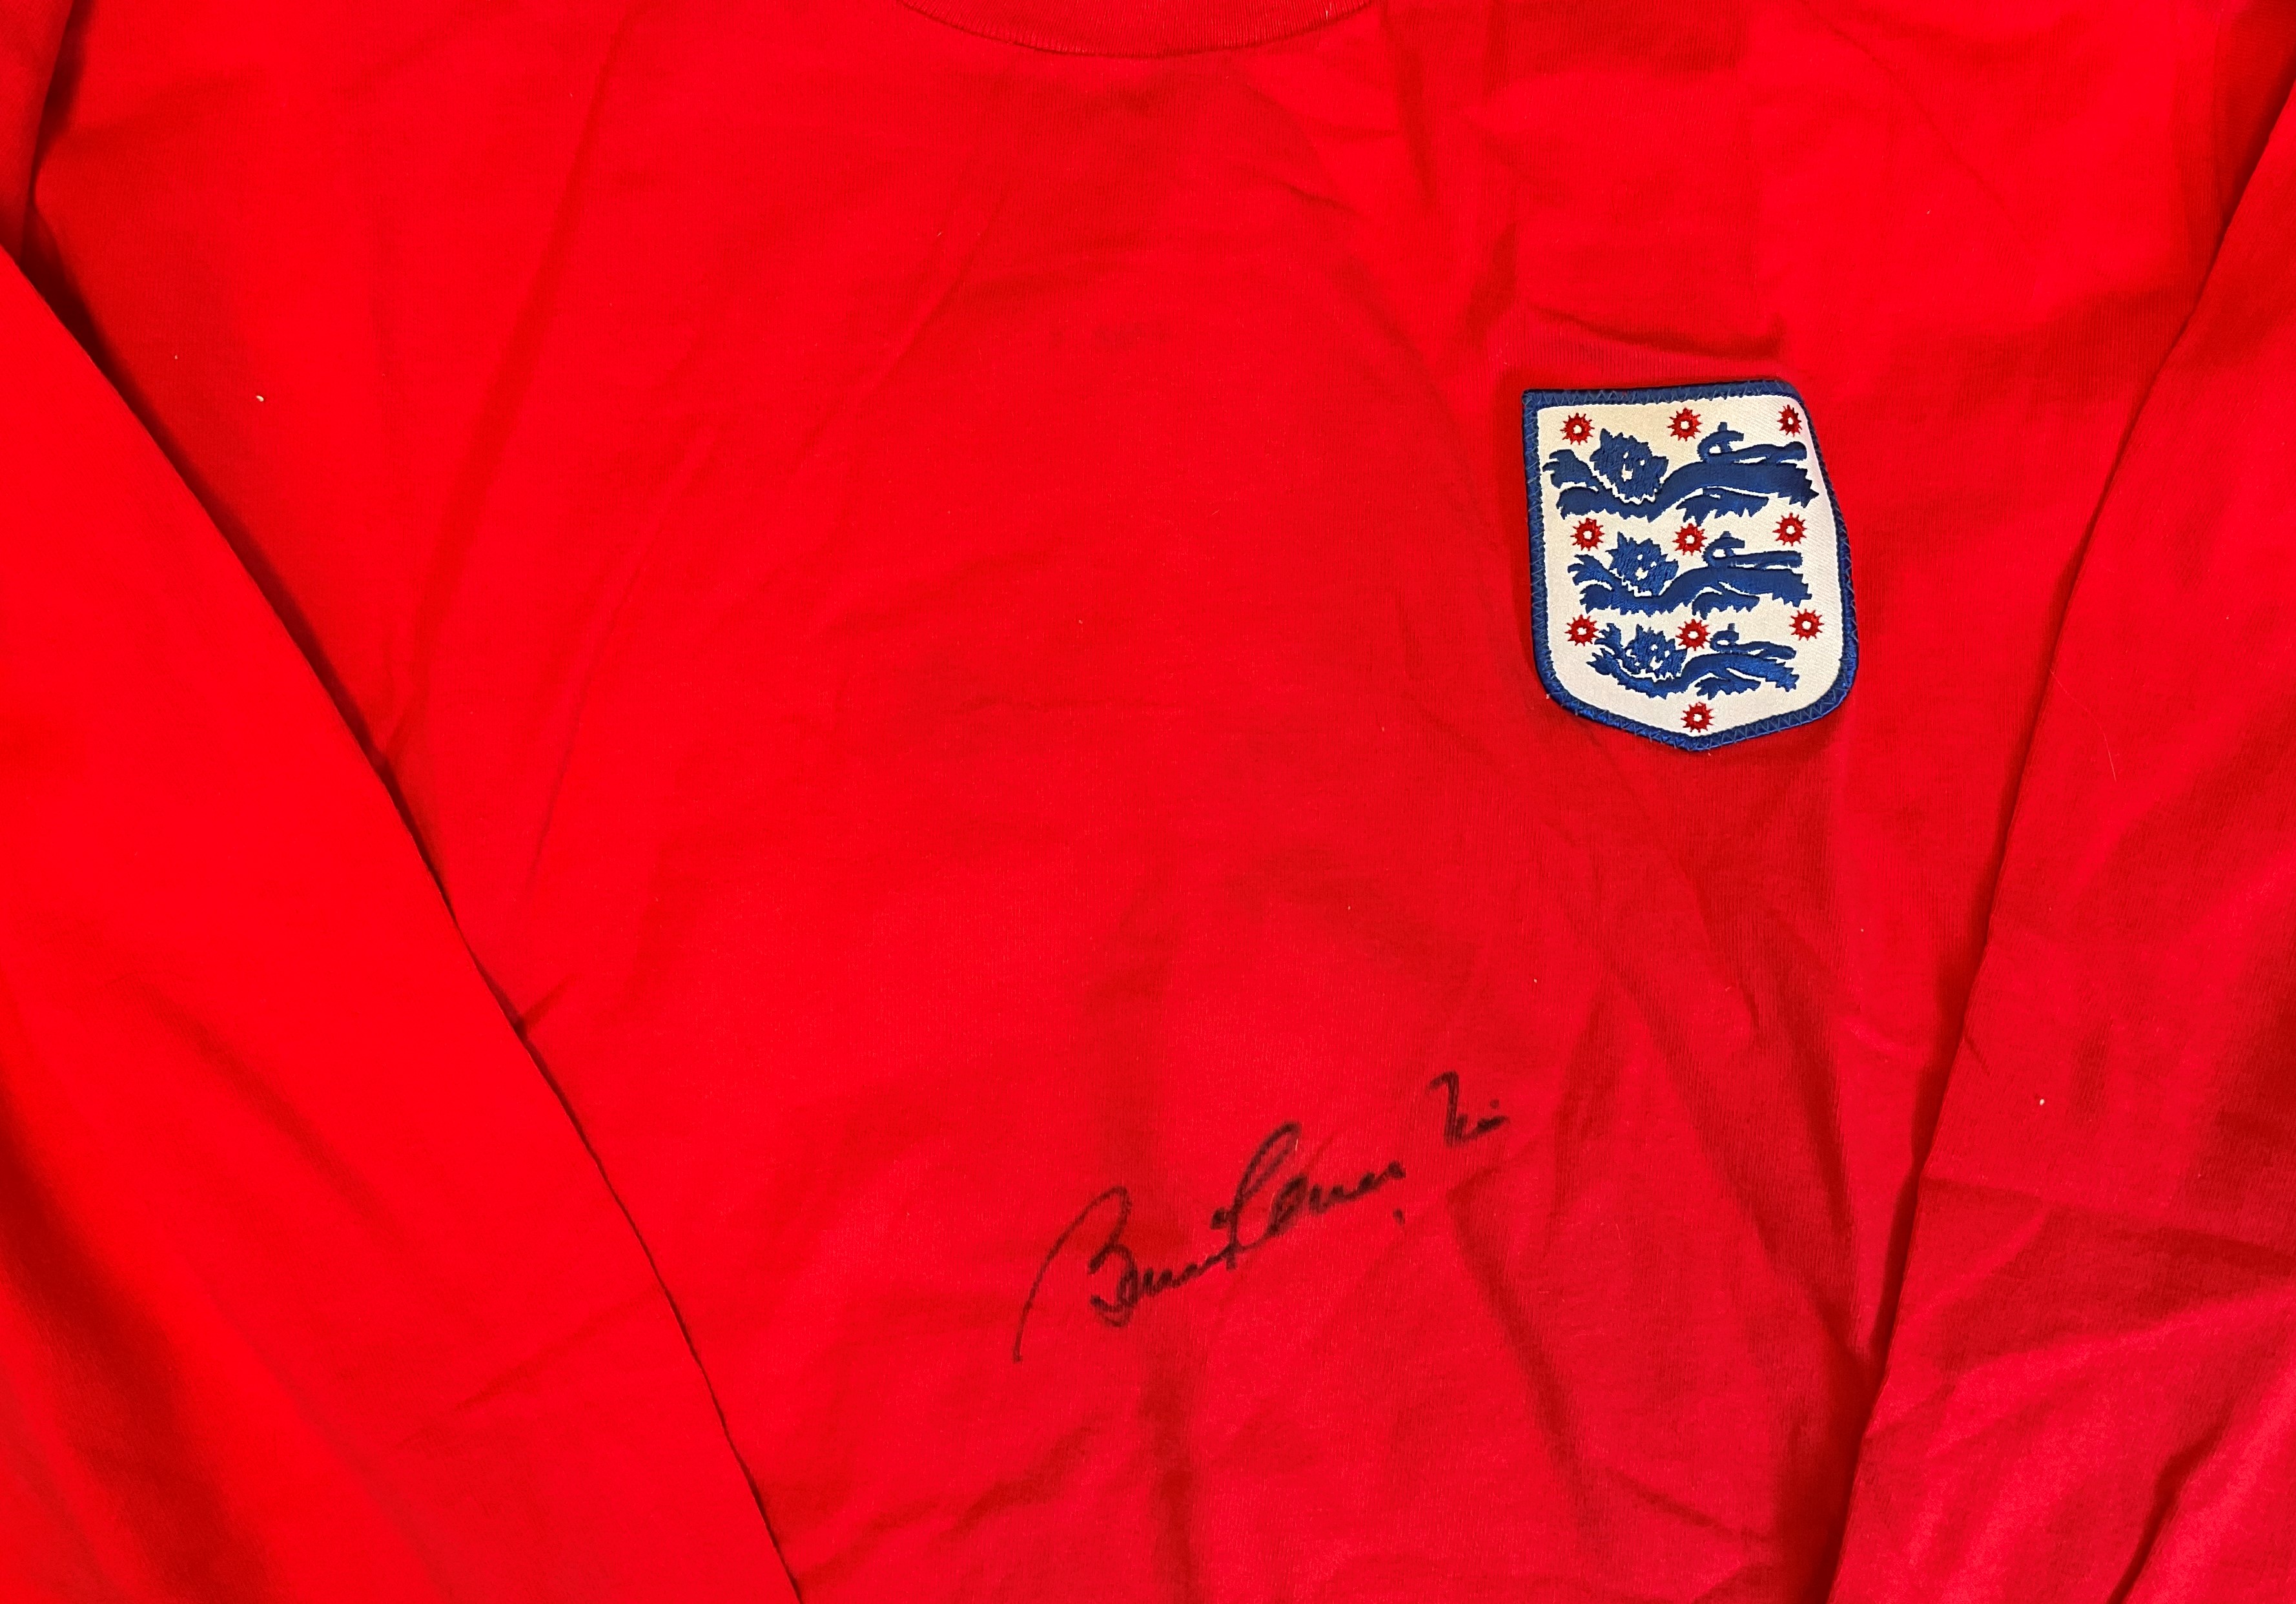 Football Bobby Charlton signed England 1966 retro shirt. Good condition. All autographs come with - Image 2 of 2